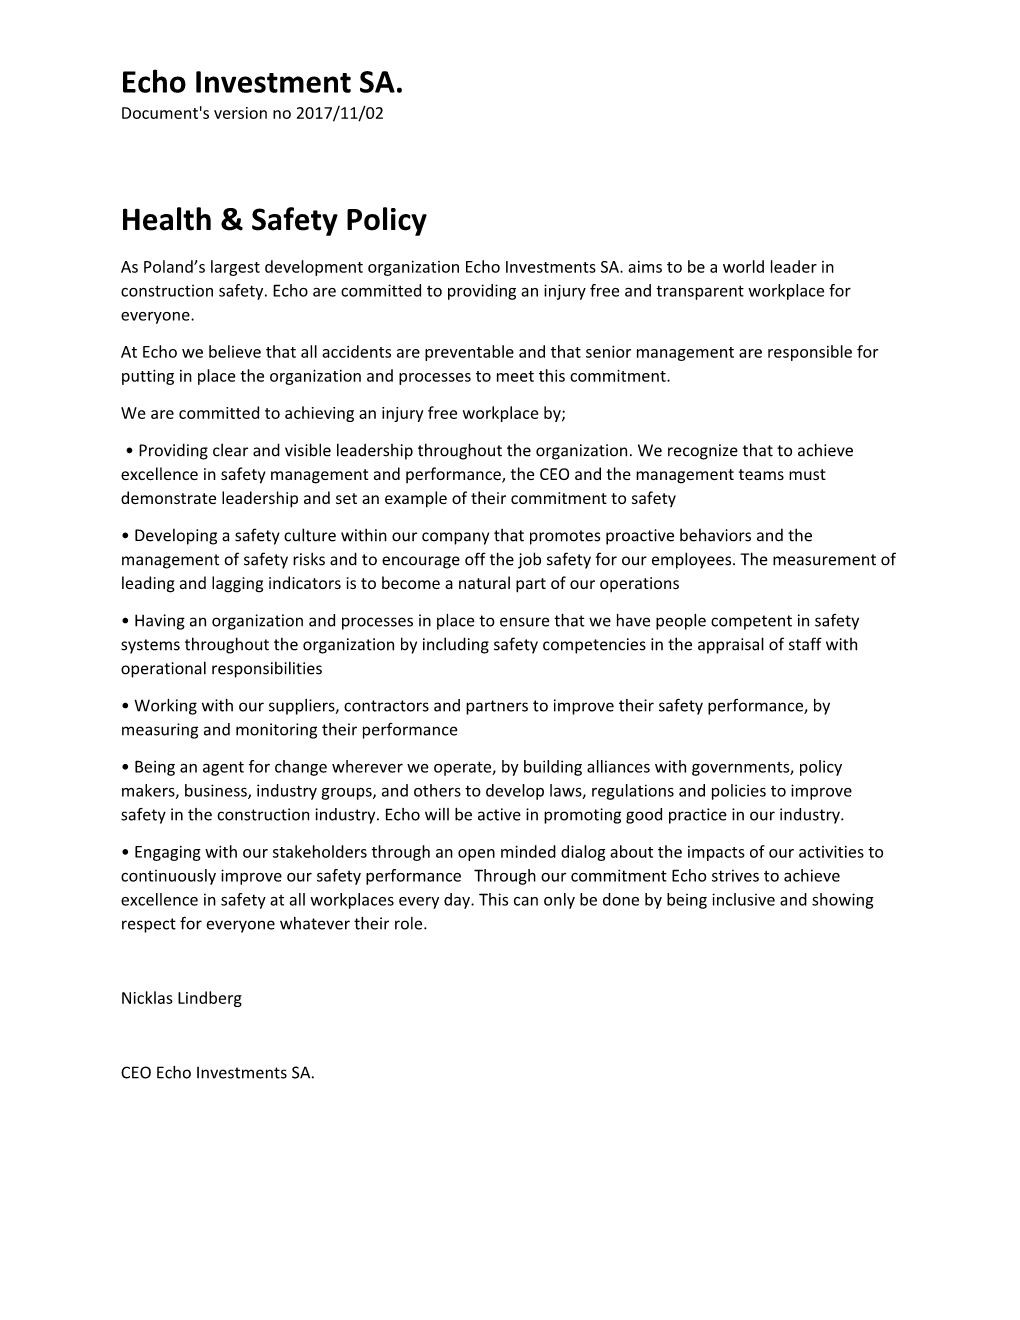 Echo Investments SA. Safety Policy Statement